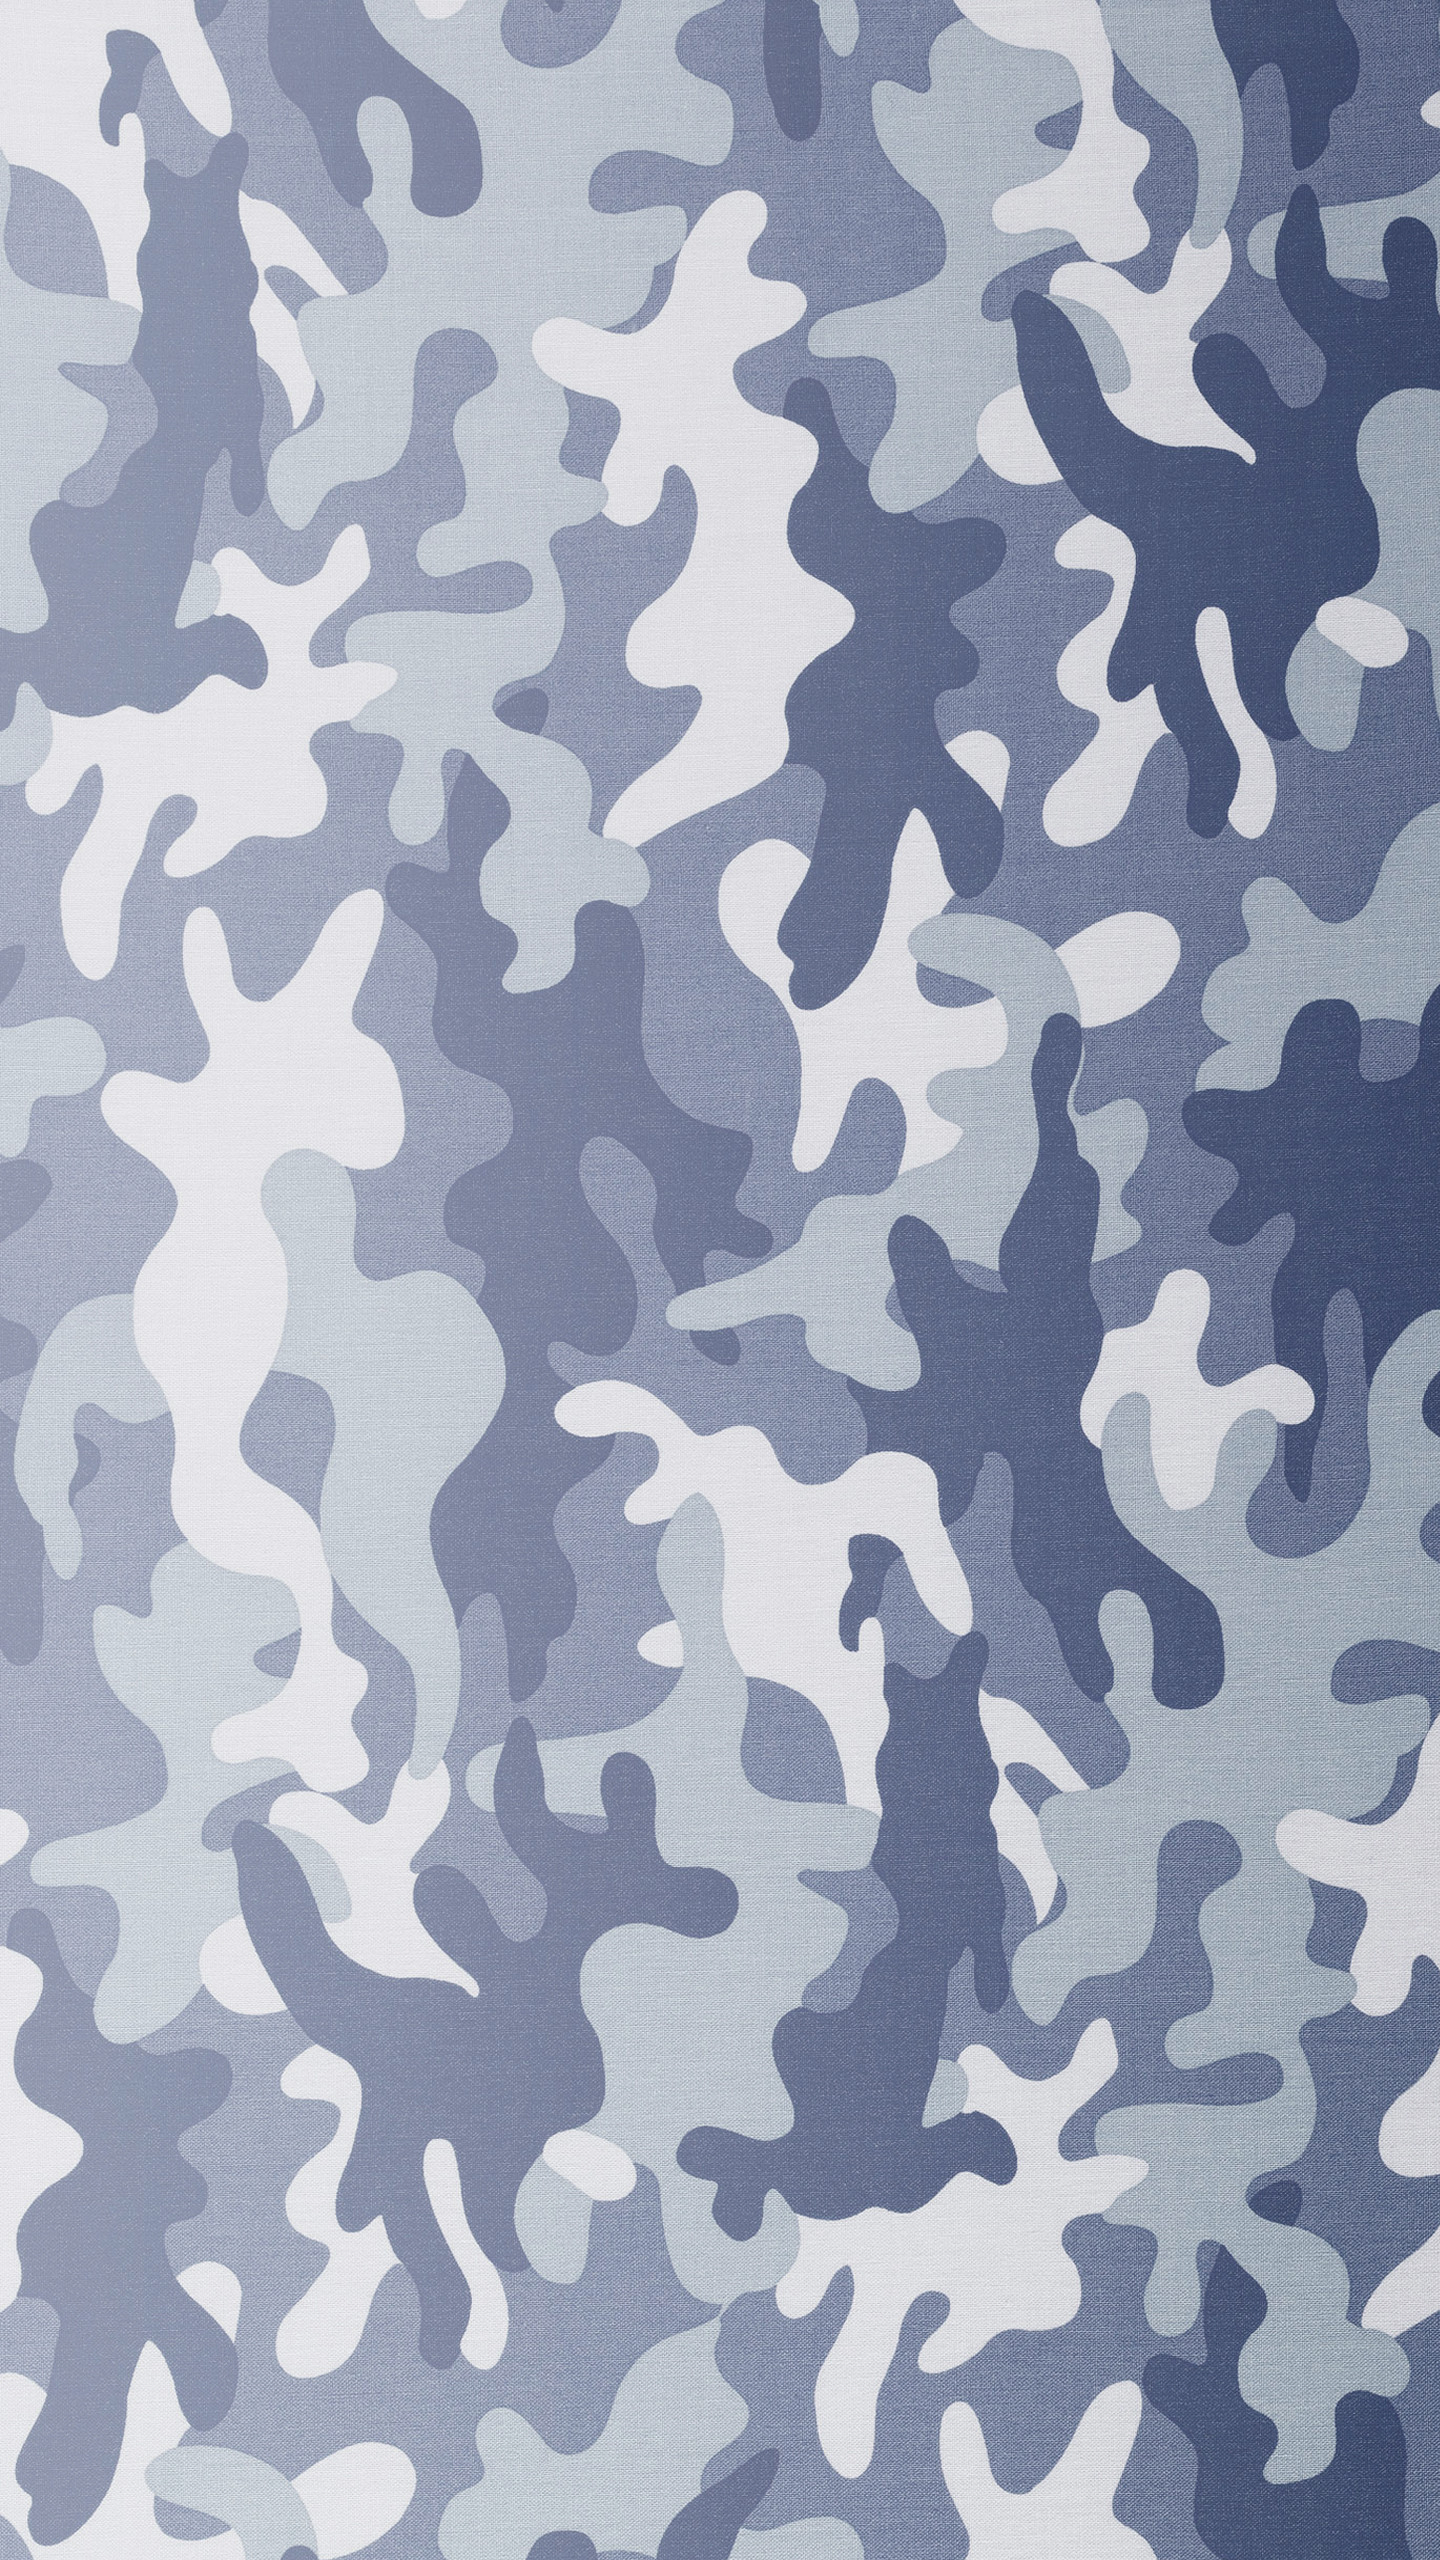 Download the Android Grey Camouflage wallpaper